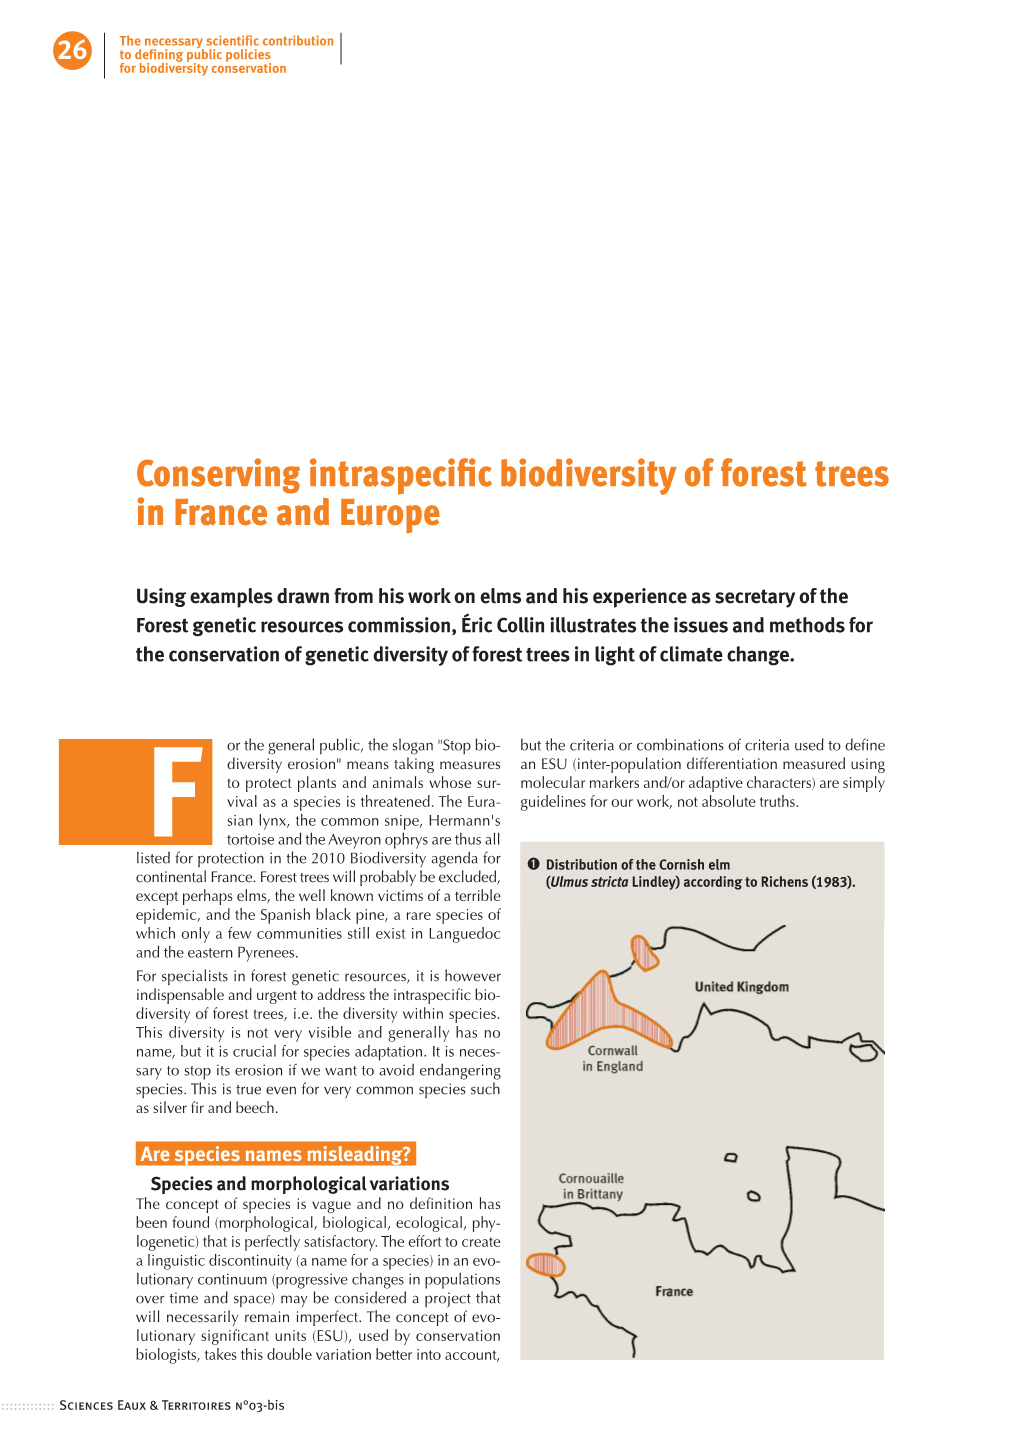 Conserving Intraspecific Biodiversity of Forest Trees in France and Europe